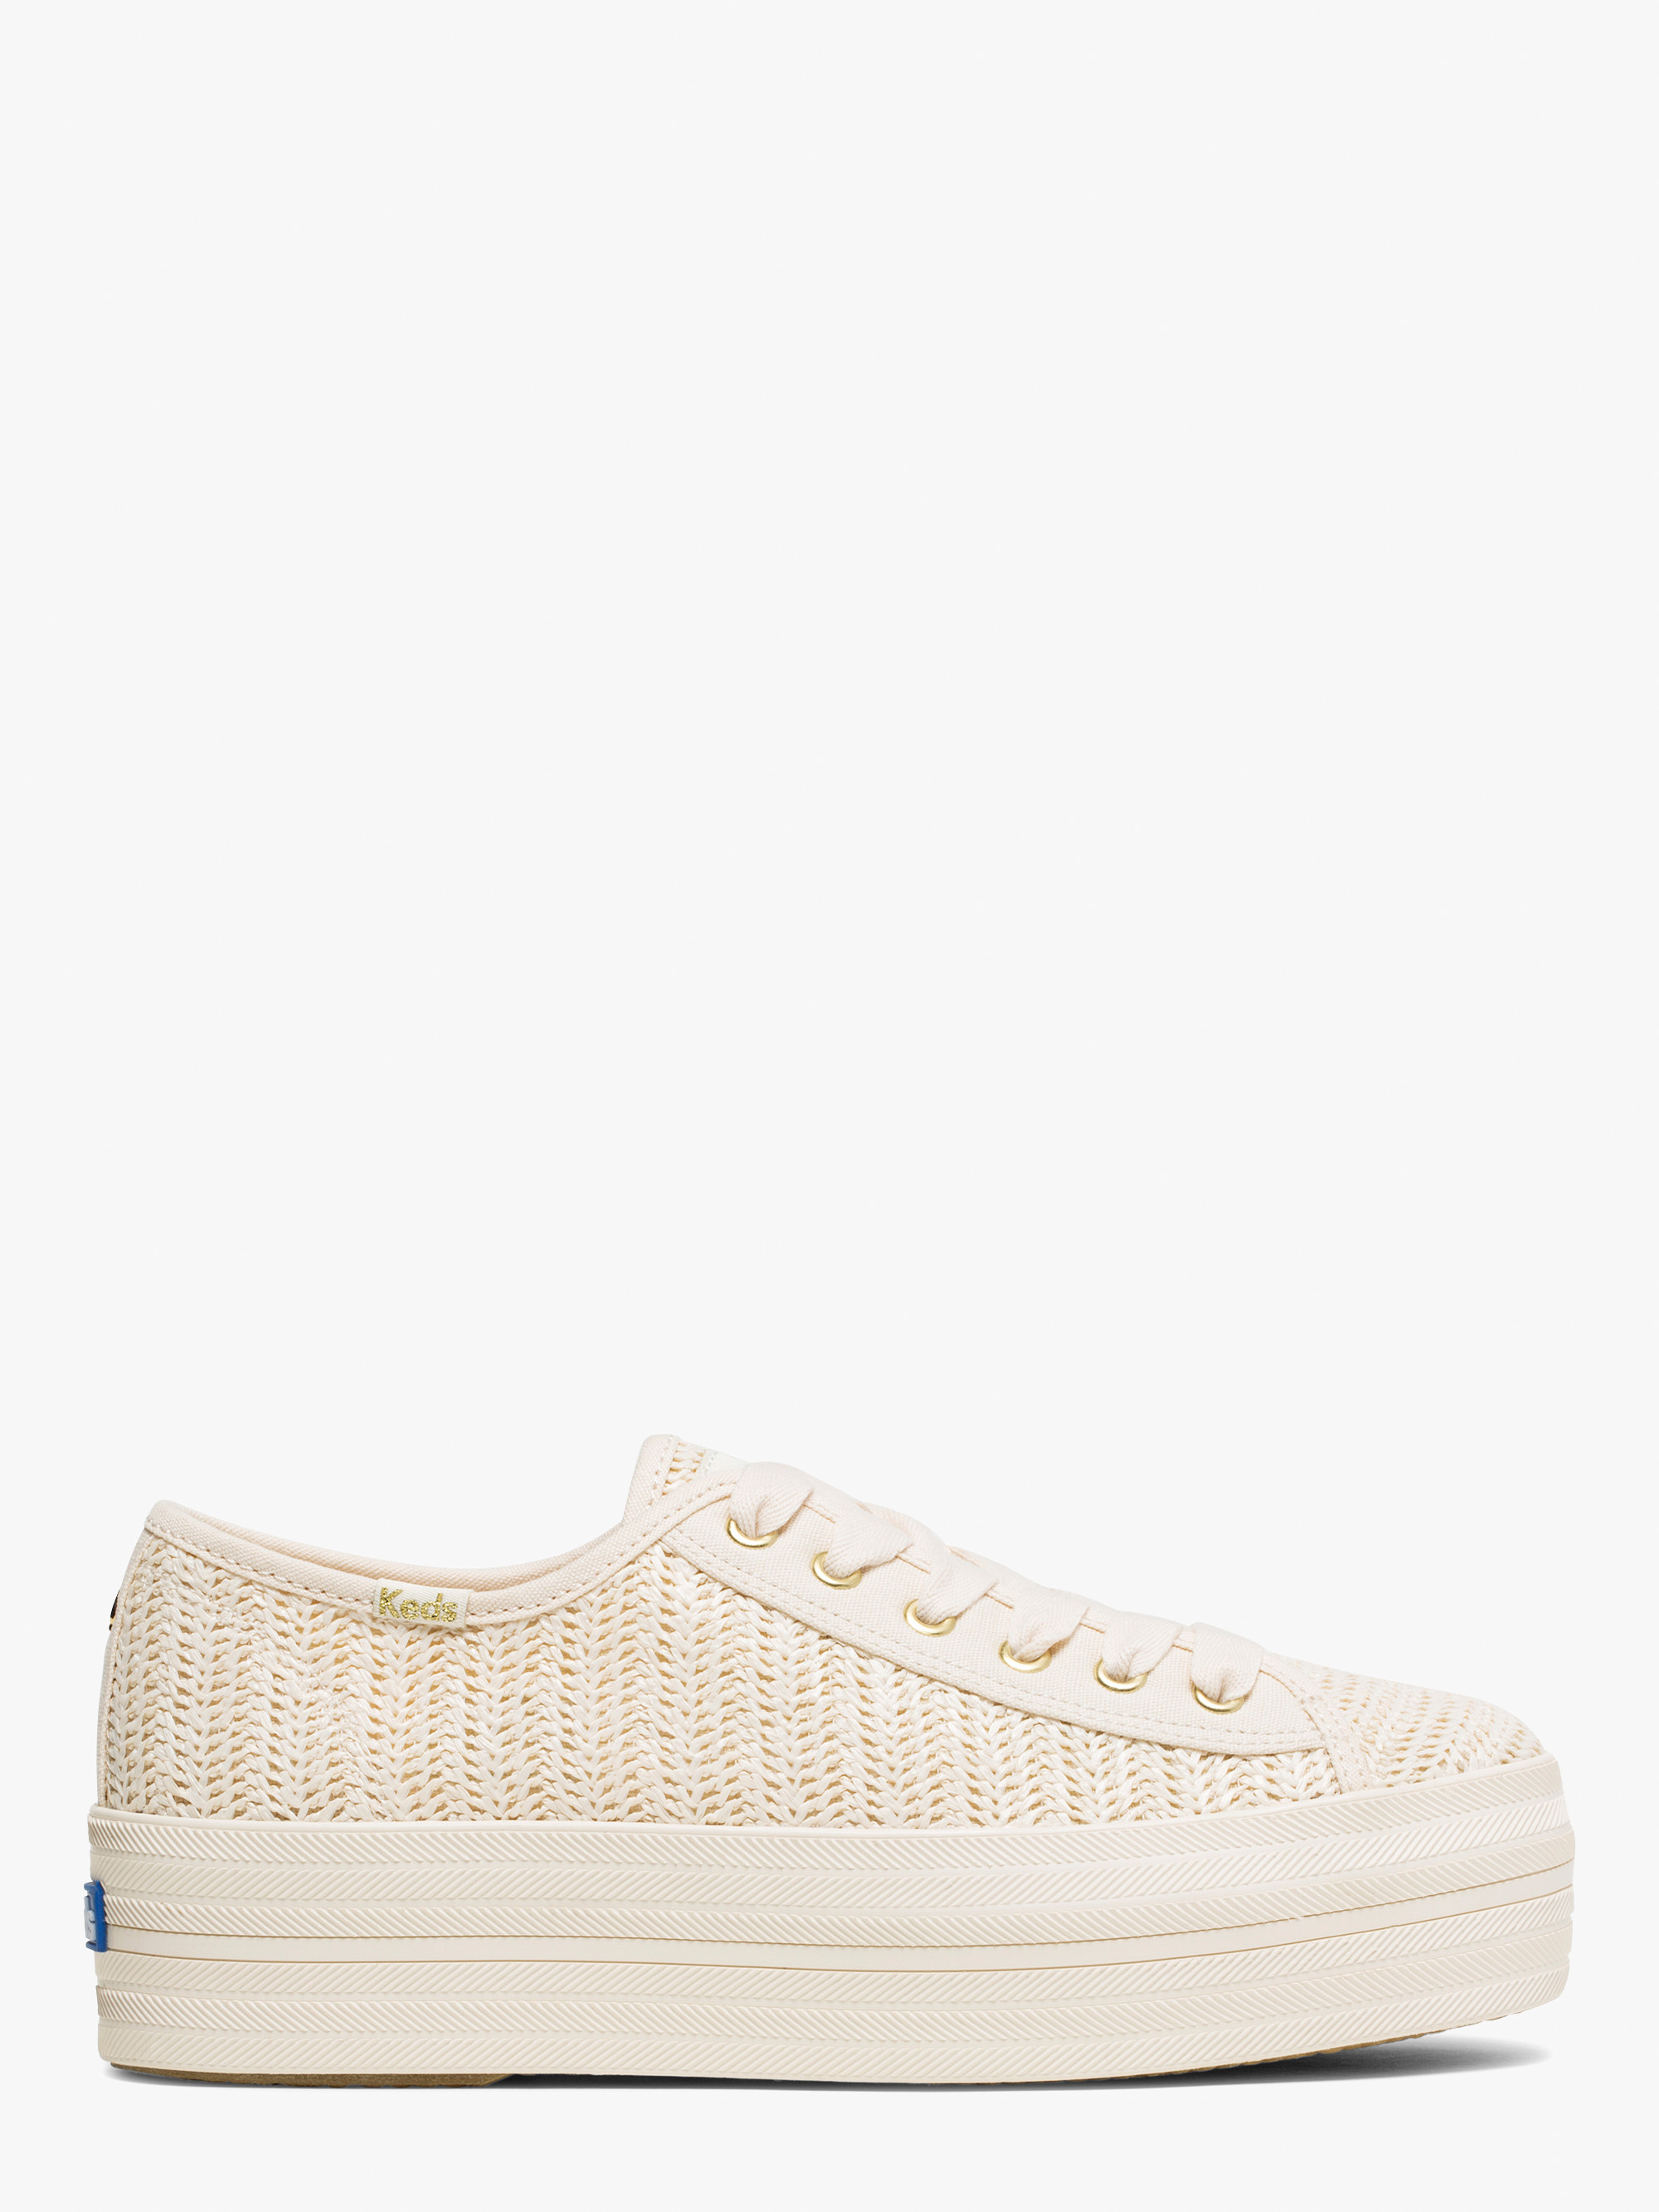 keds x kate spade new york triple up woven sneakers